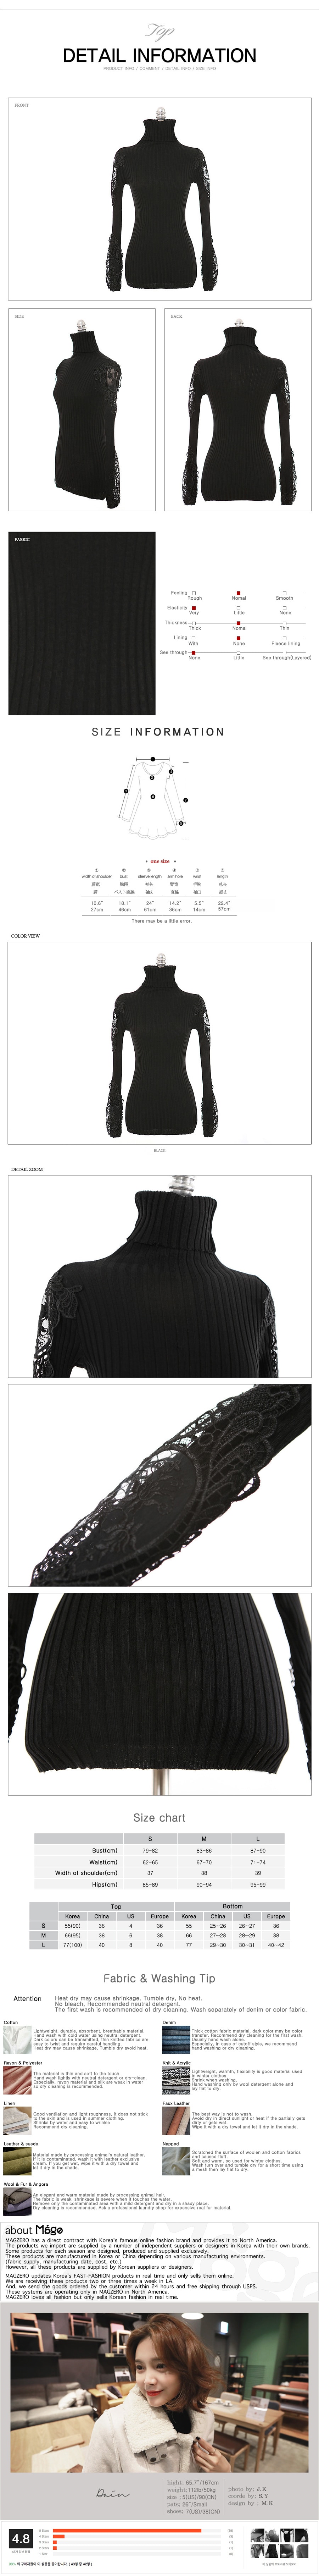 KOREA Lace Trim Ribbed Knit Turtleneck Top Black One Size(S-M) [Free Shipping]